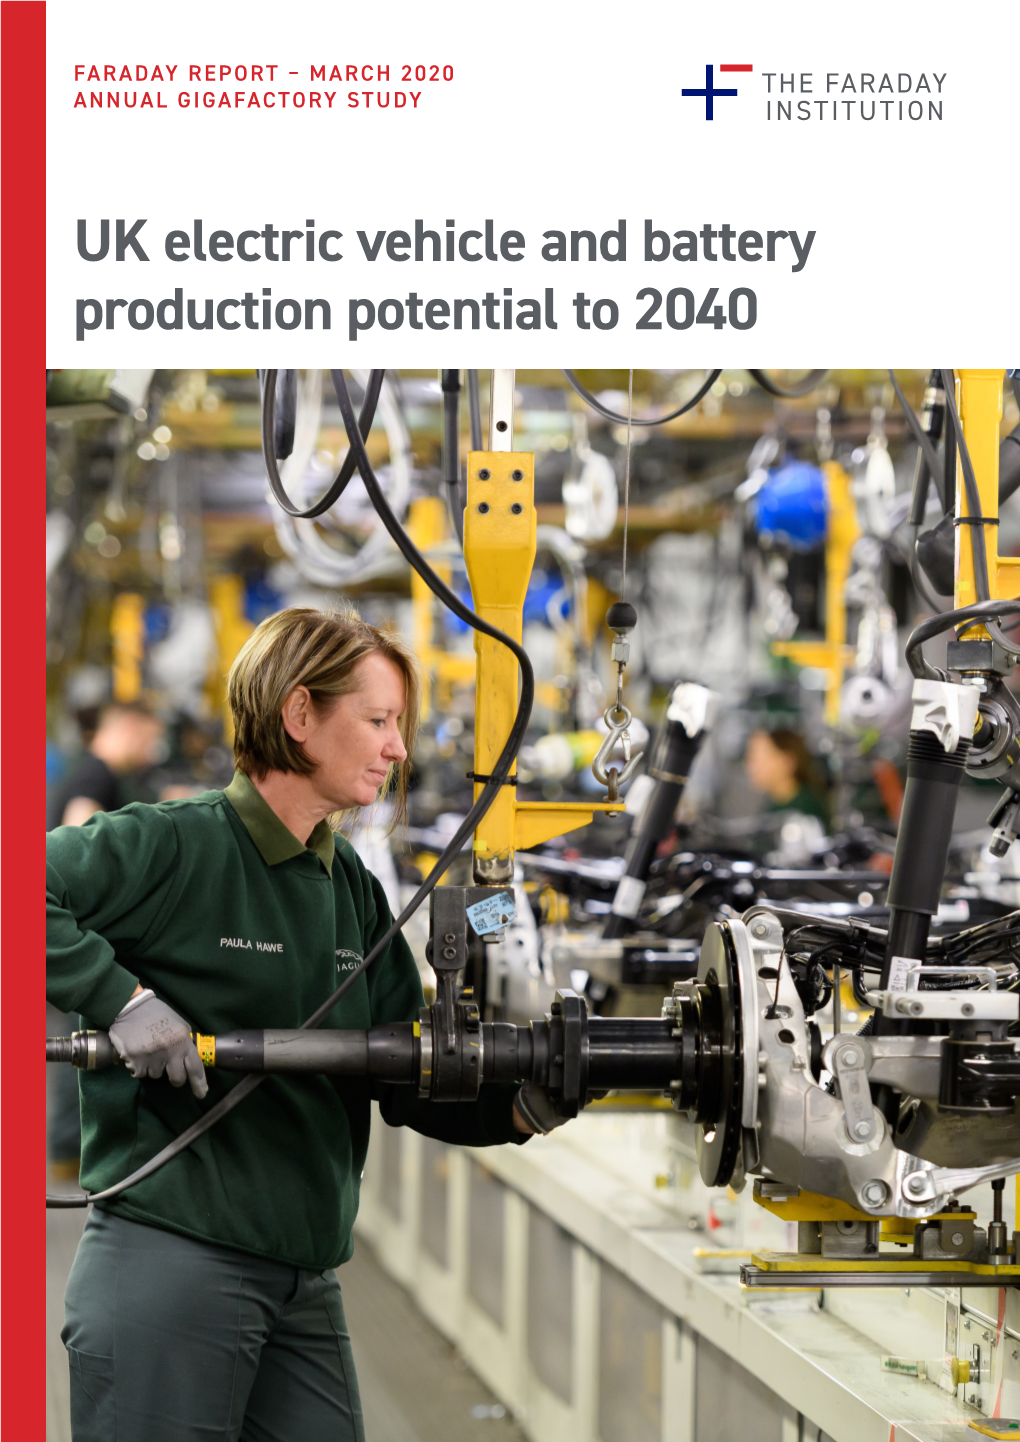 UK Electric Vehicle and Battery Production Potential to 2040 FARADAY REPORT – ANNUAL GIGAFACTORY STUDY 2020